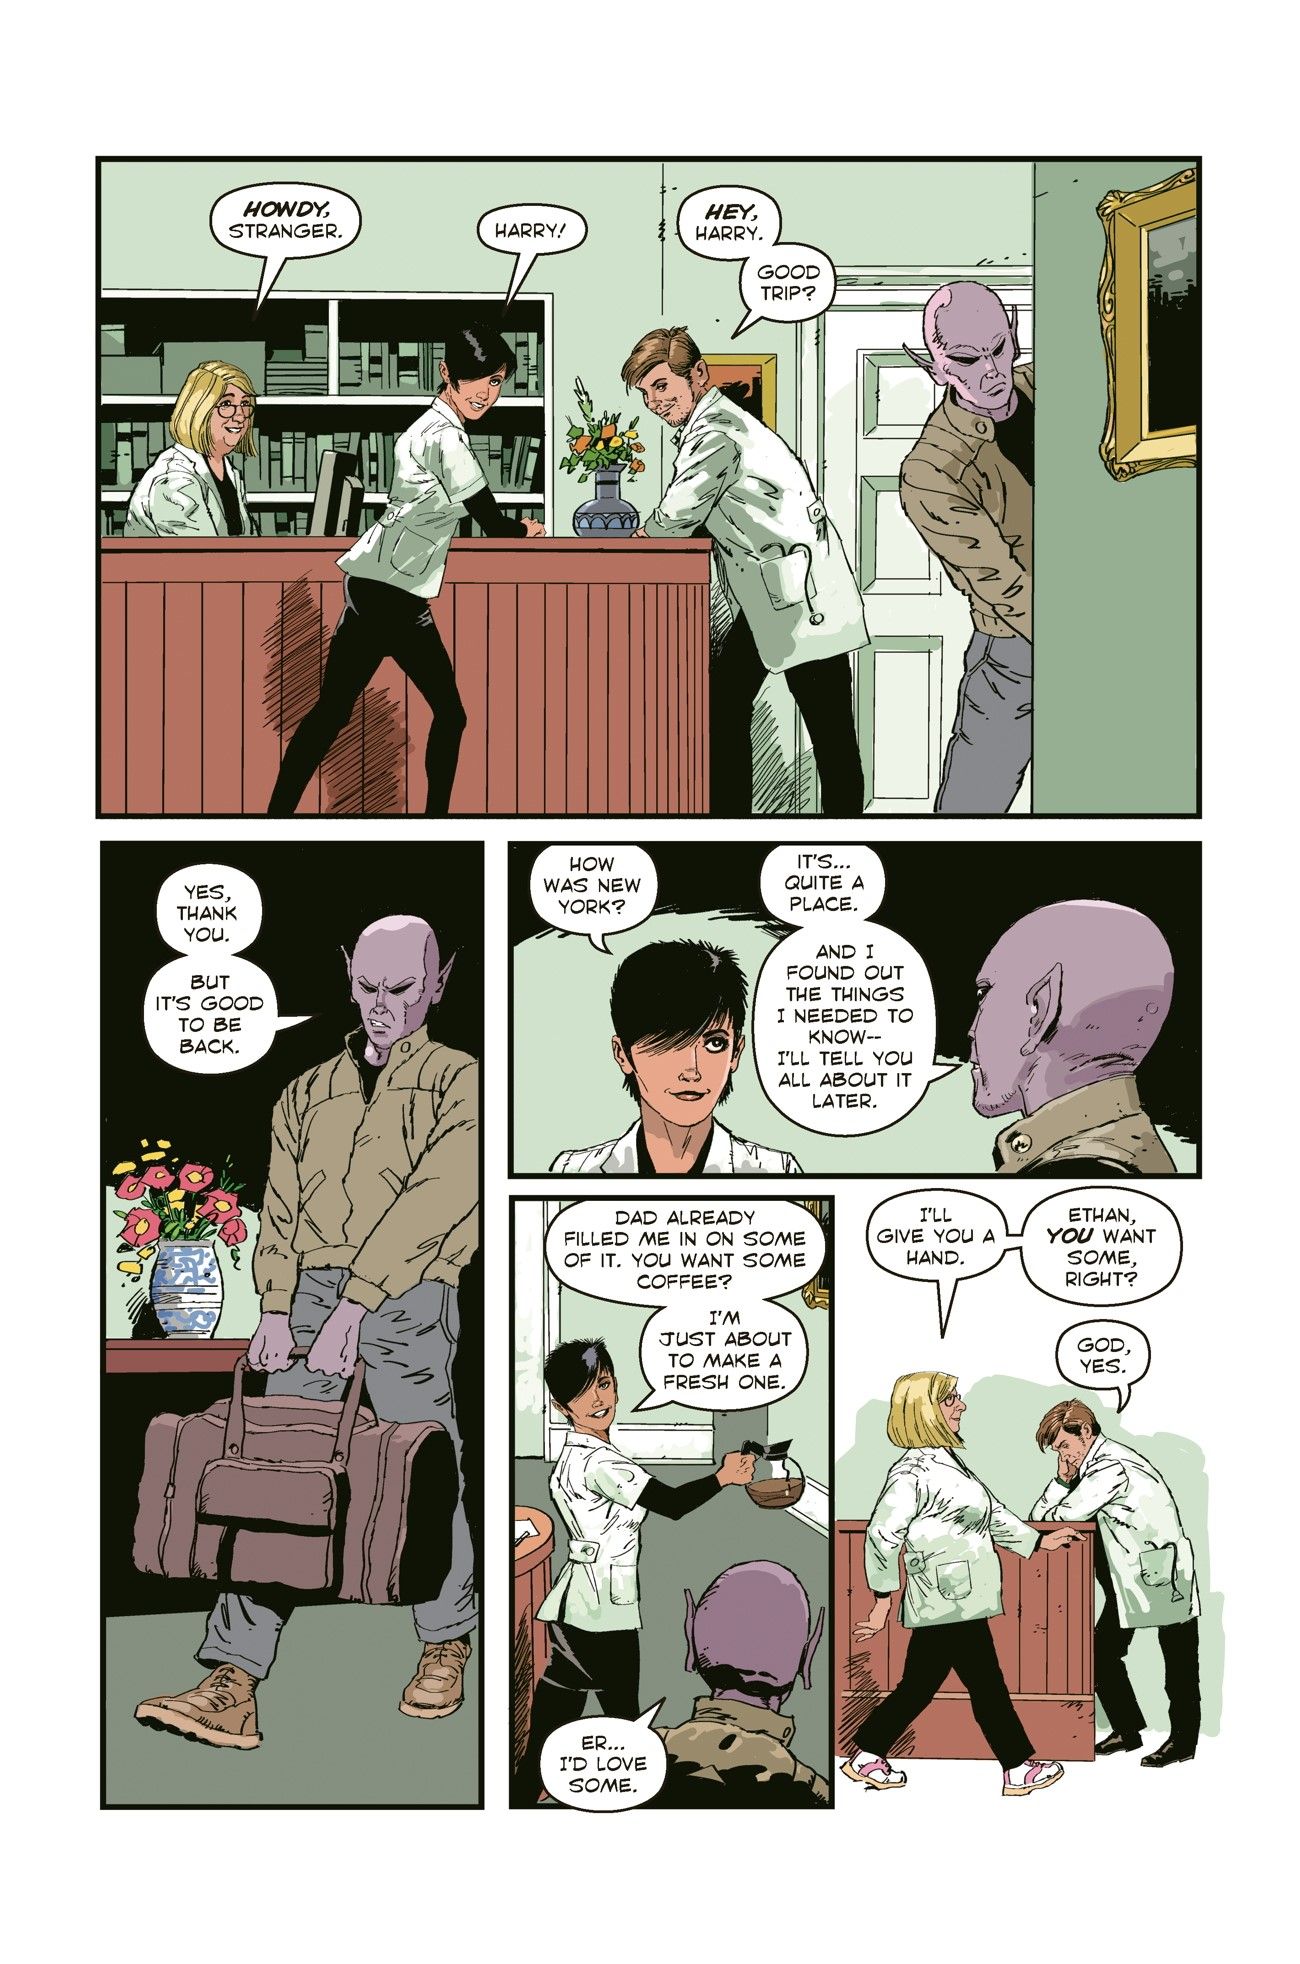 Resident Alien Drops Your Ride’s Here #1 Preview Ahead of Upcoming Syfy Series